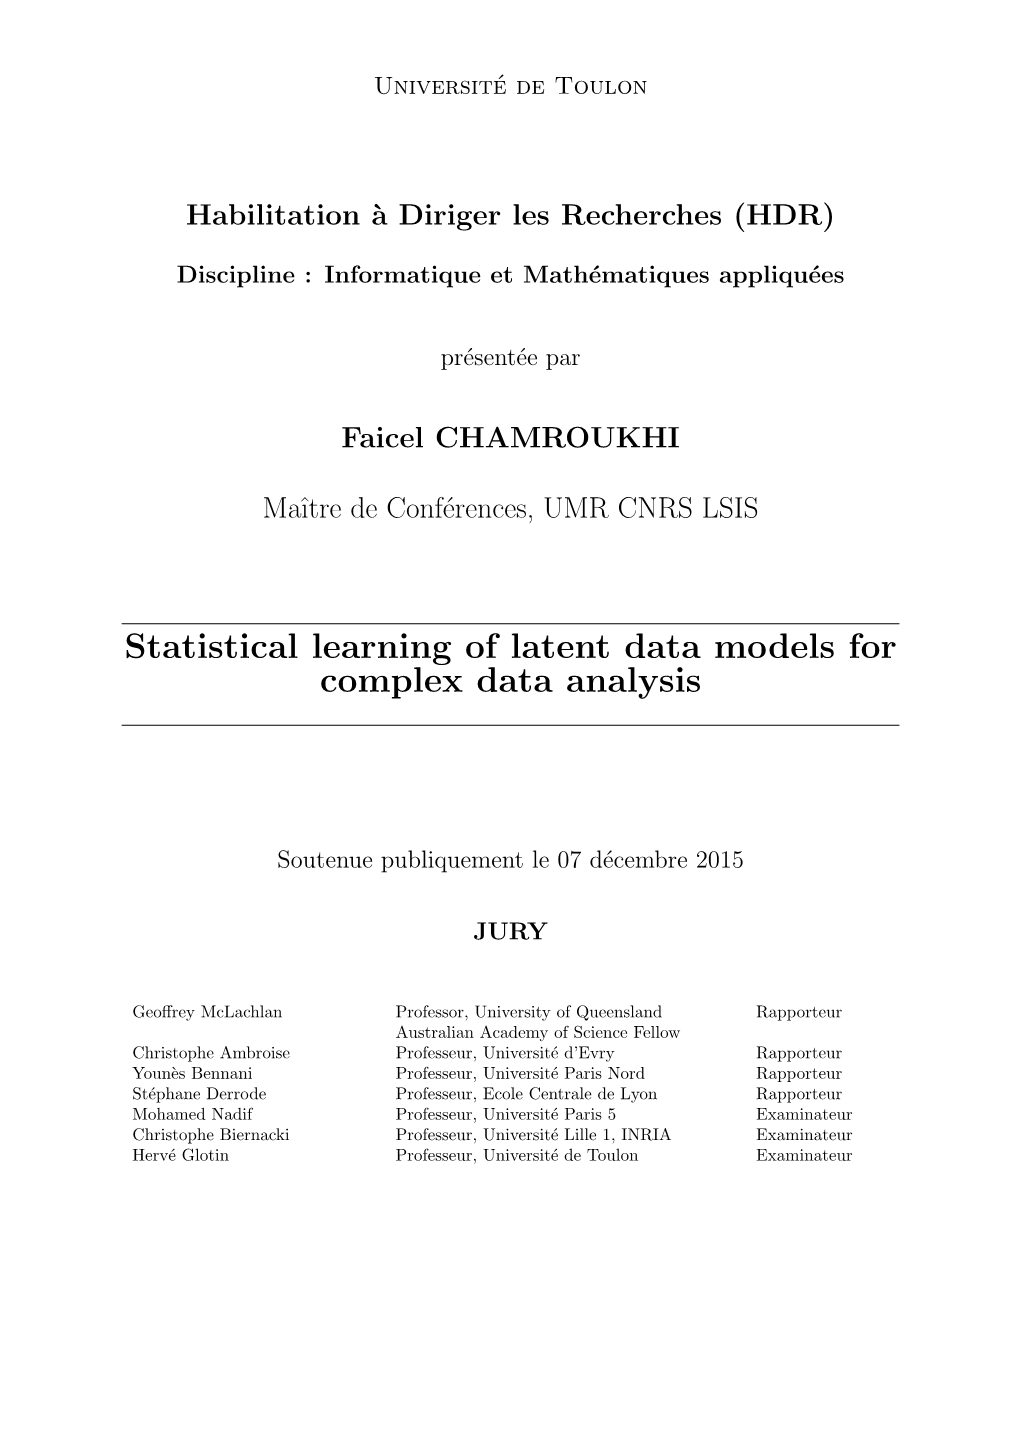 Statistical Learning of Latent Data Models for Complex Data Analysis